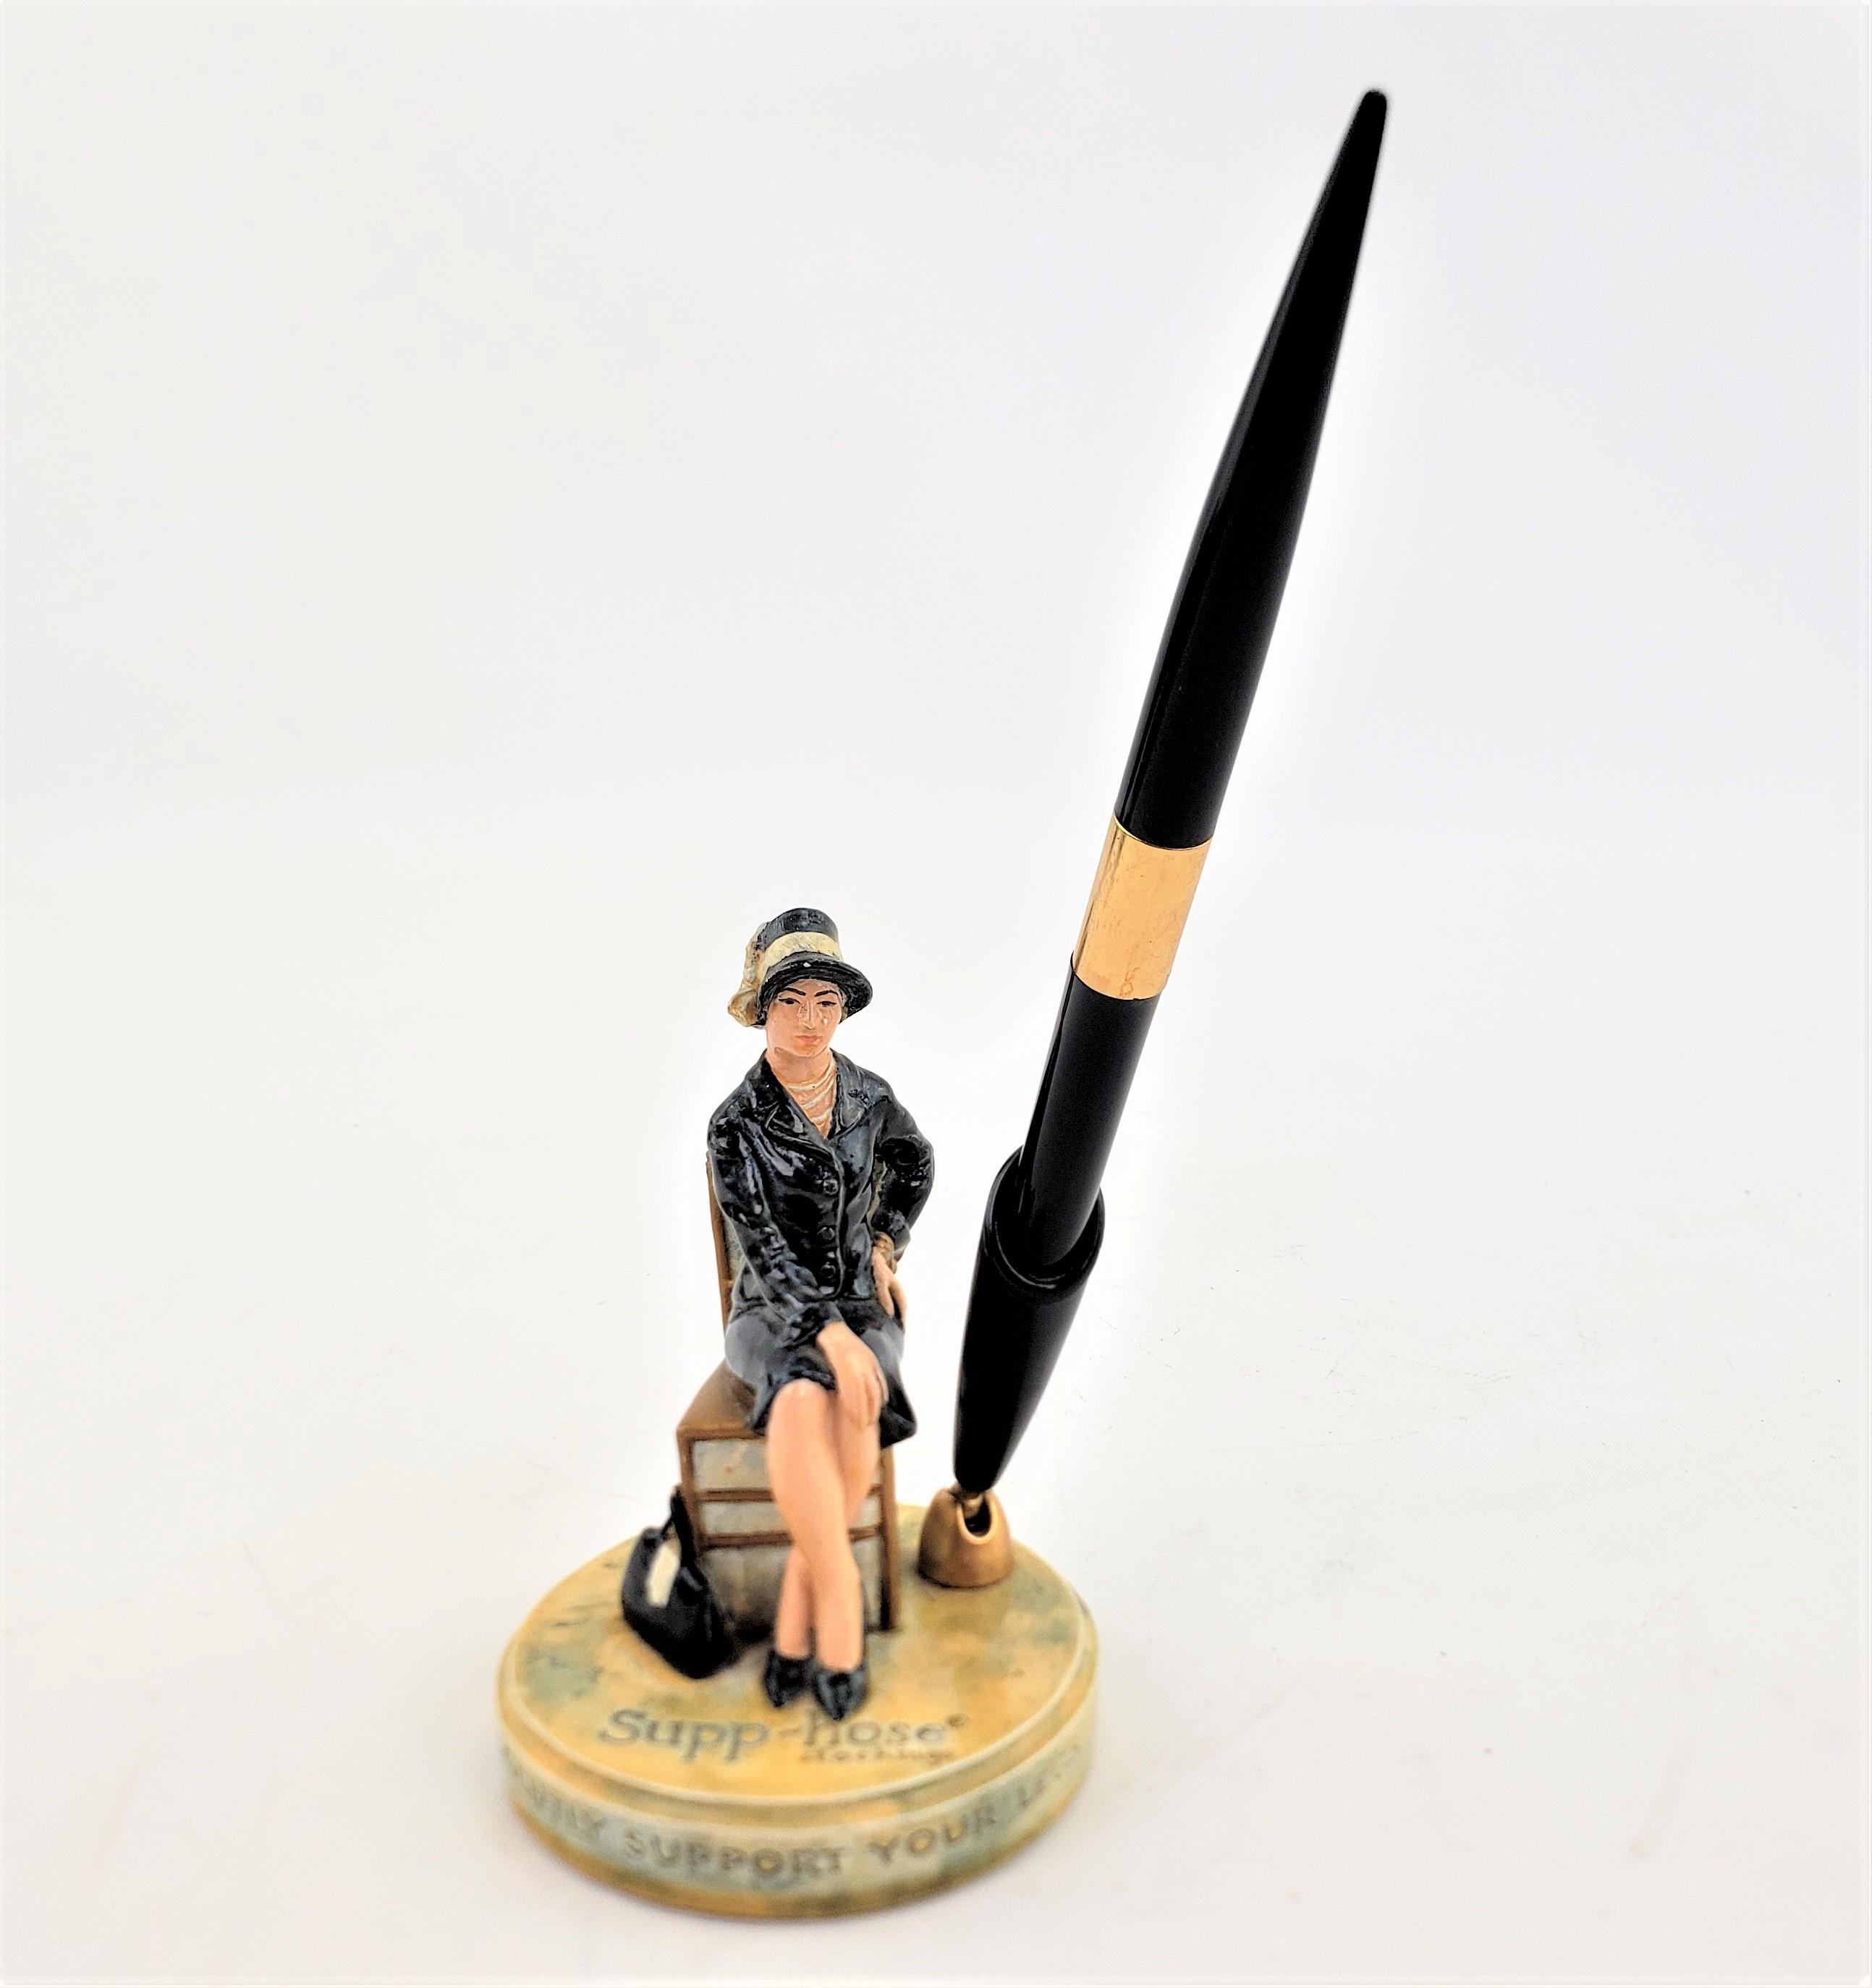 This advertising pend holder was produced by P.W. Baston, also known as Sebastian Miniatures, of the United States in approximately 1960 in the period Mid-Century Modern style. The figurine is composed of a glazed ceramic with a brass and plastic